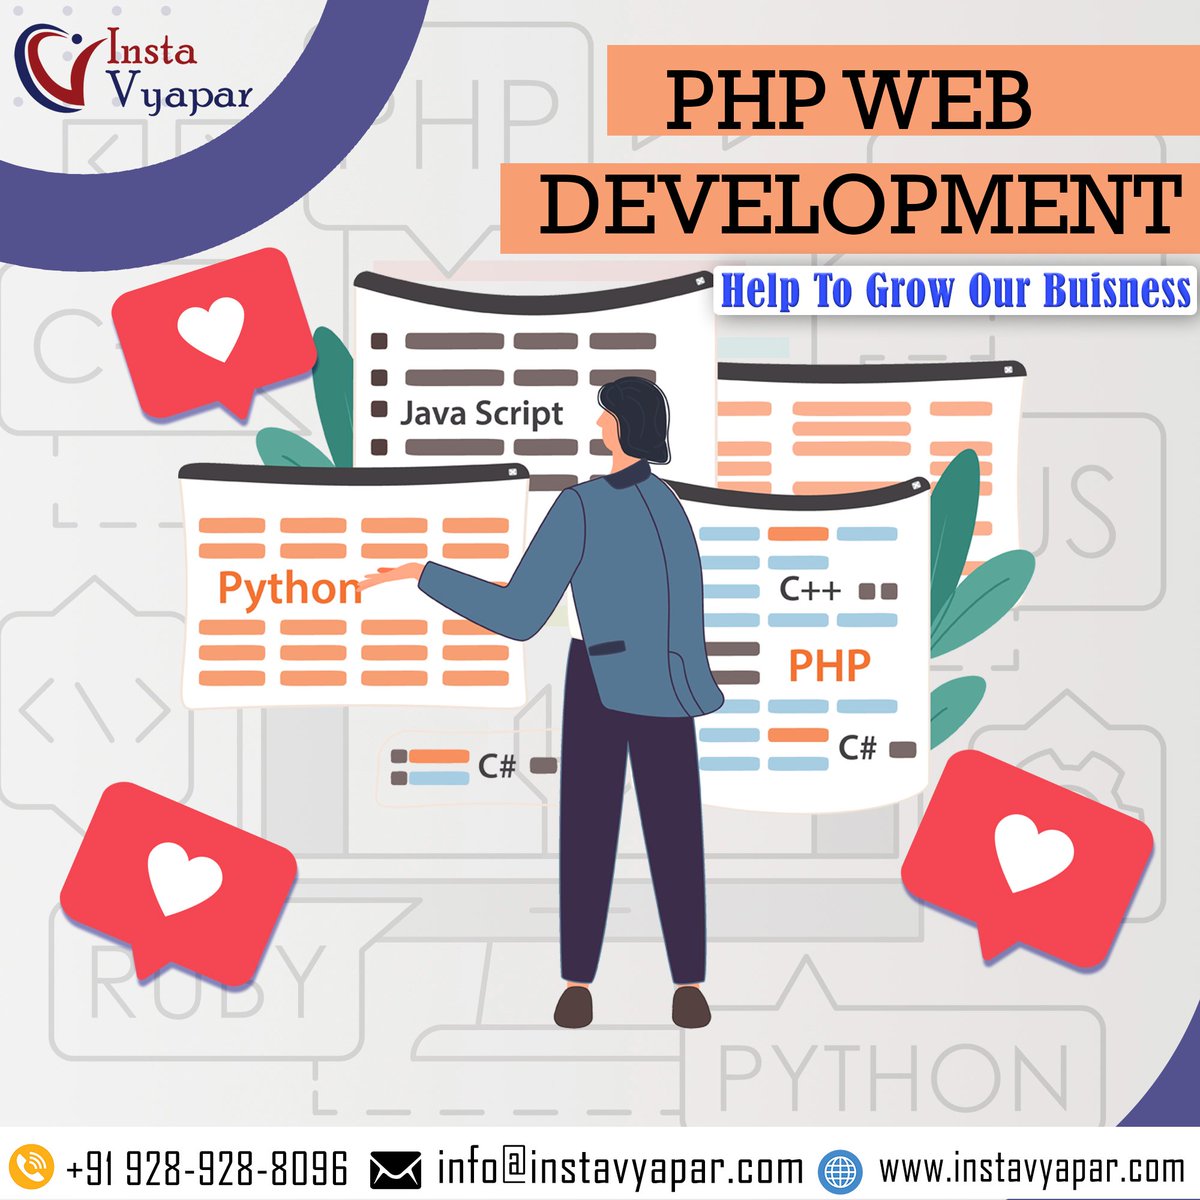 Insta Vyapar specializes in developing great PHP Websites for every business type. Whether you need a website to generate sales, leads.

📲 +91-9289288096
🌐 instavyapar.com
📩 info@instavyapar.com

#PHPWebsites #WebDevelopment #WebDeveloper #Website #PHP #Branding #Web